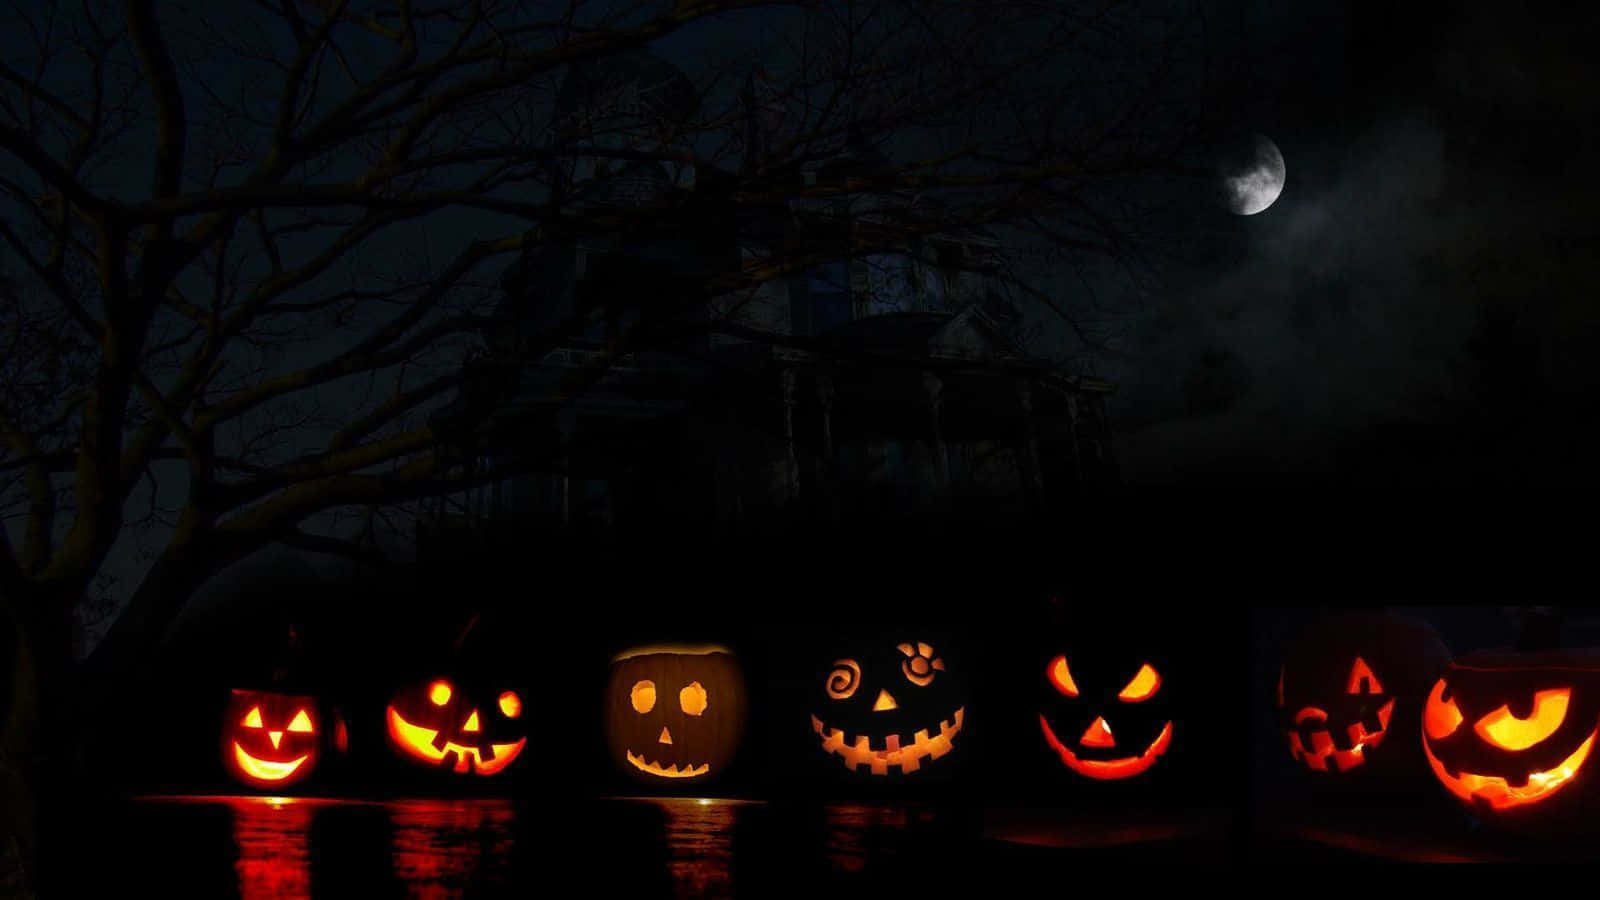 Trick or Treat? Get ready for some spooky fun this Halloween with this Animated Halloween image! Wallpaper